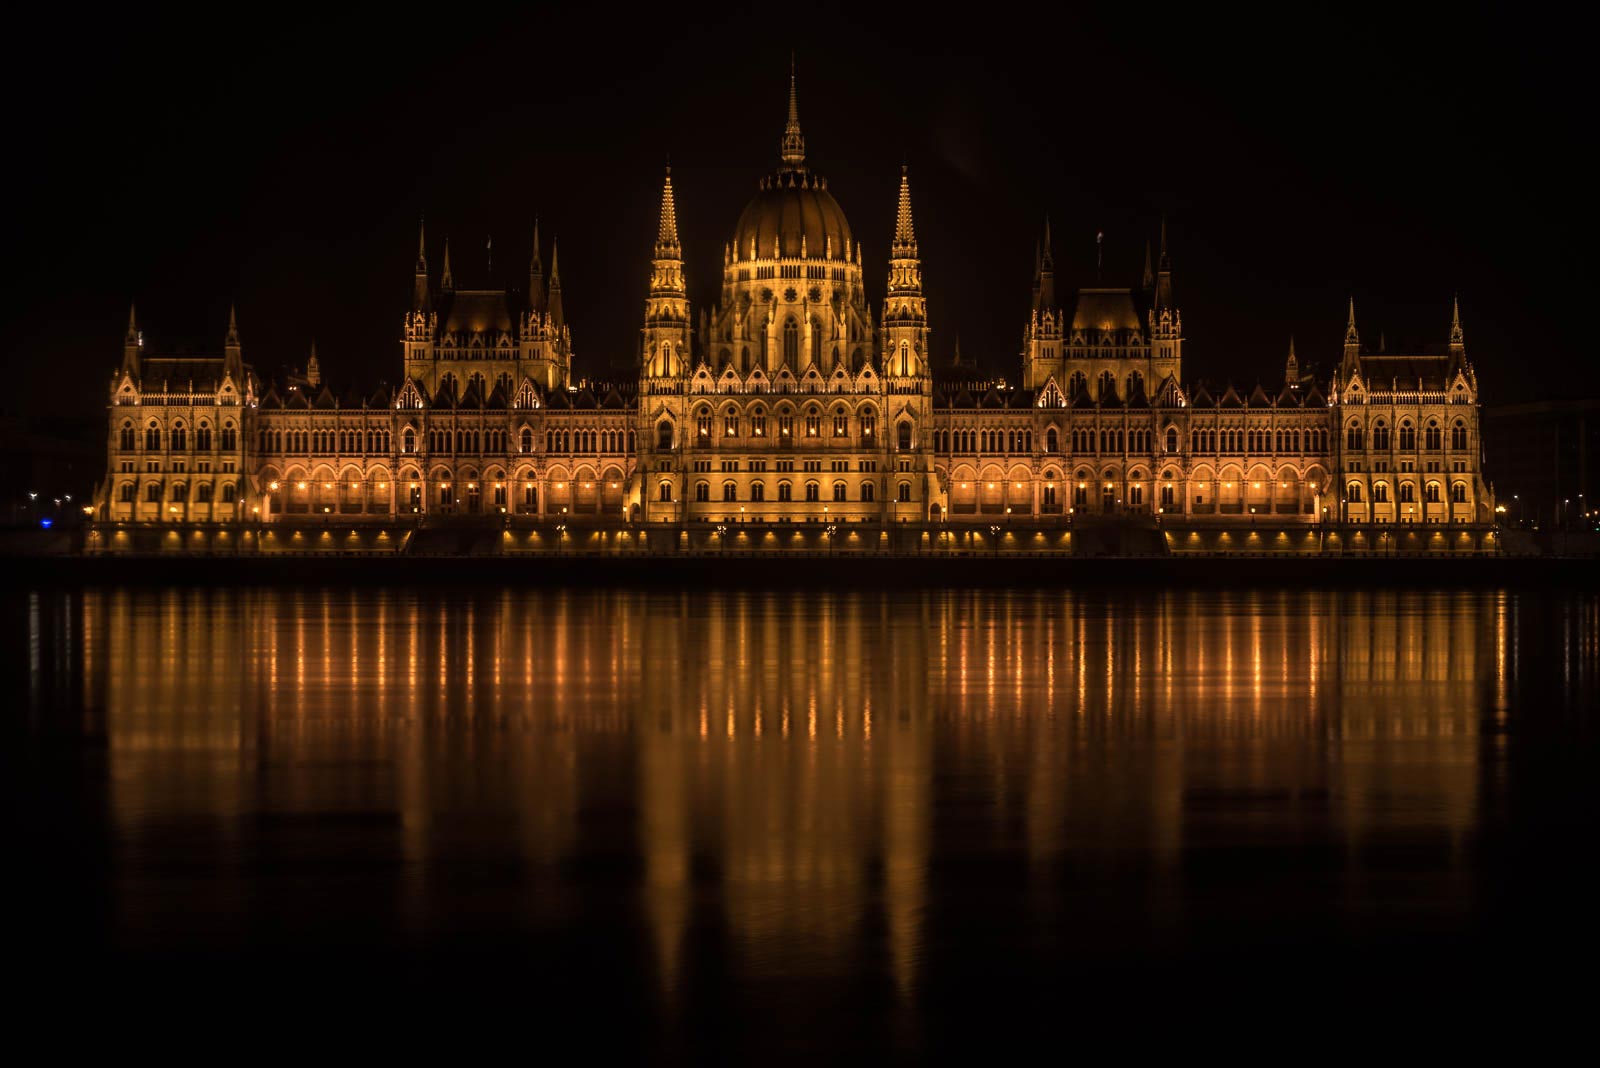 The hungarian parliament building is lit up at night.